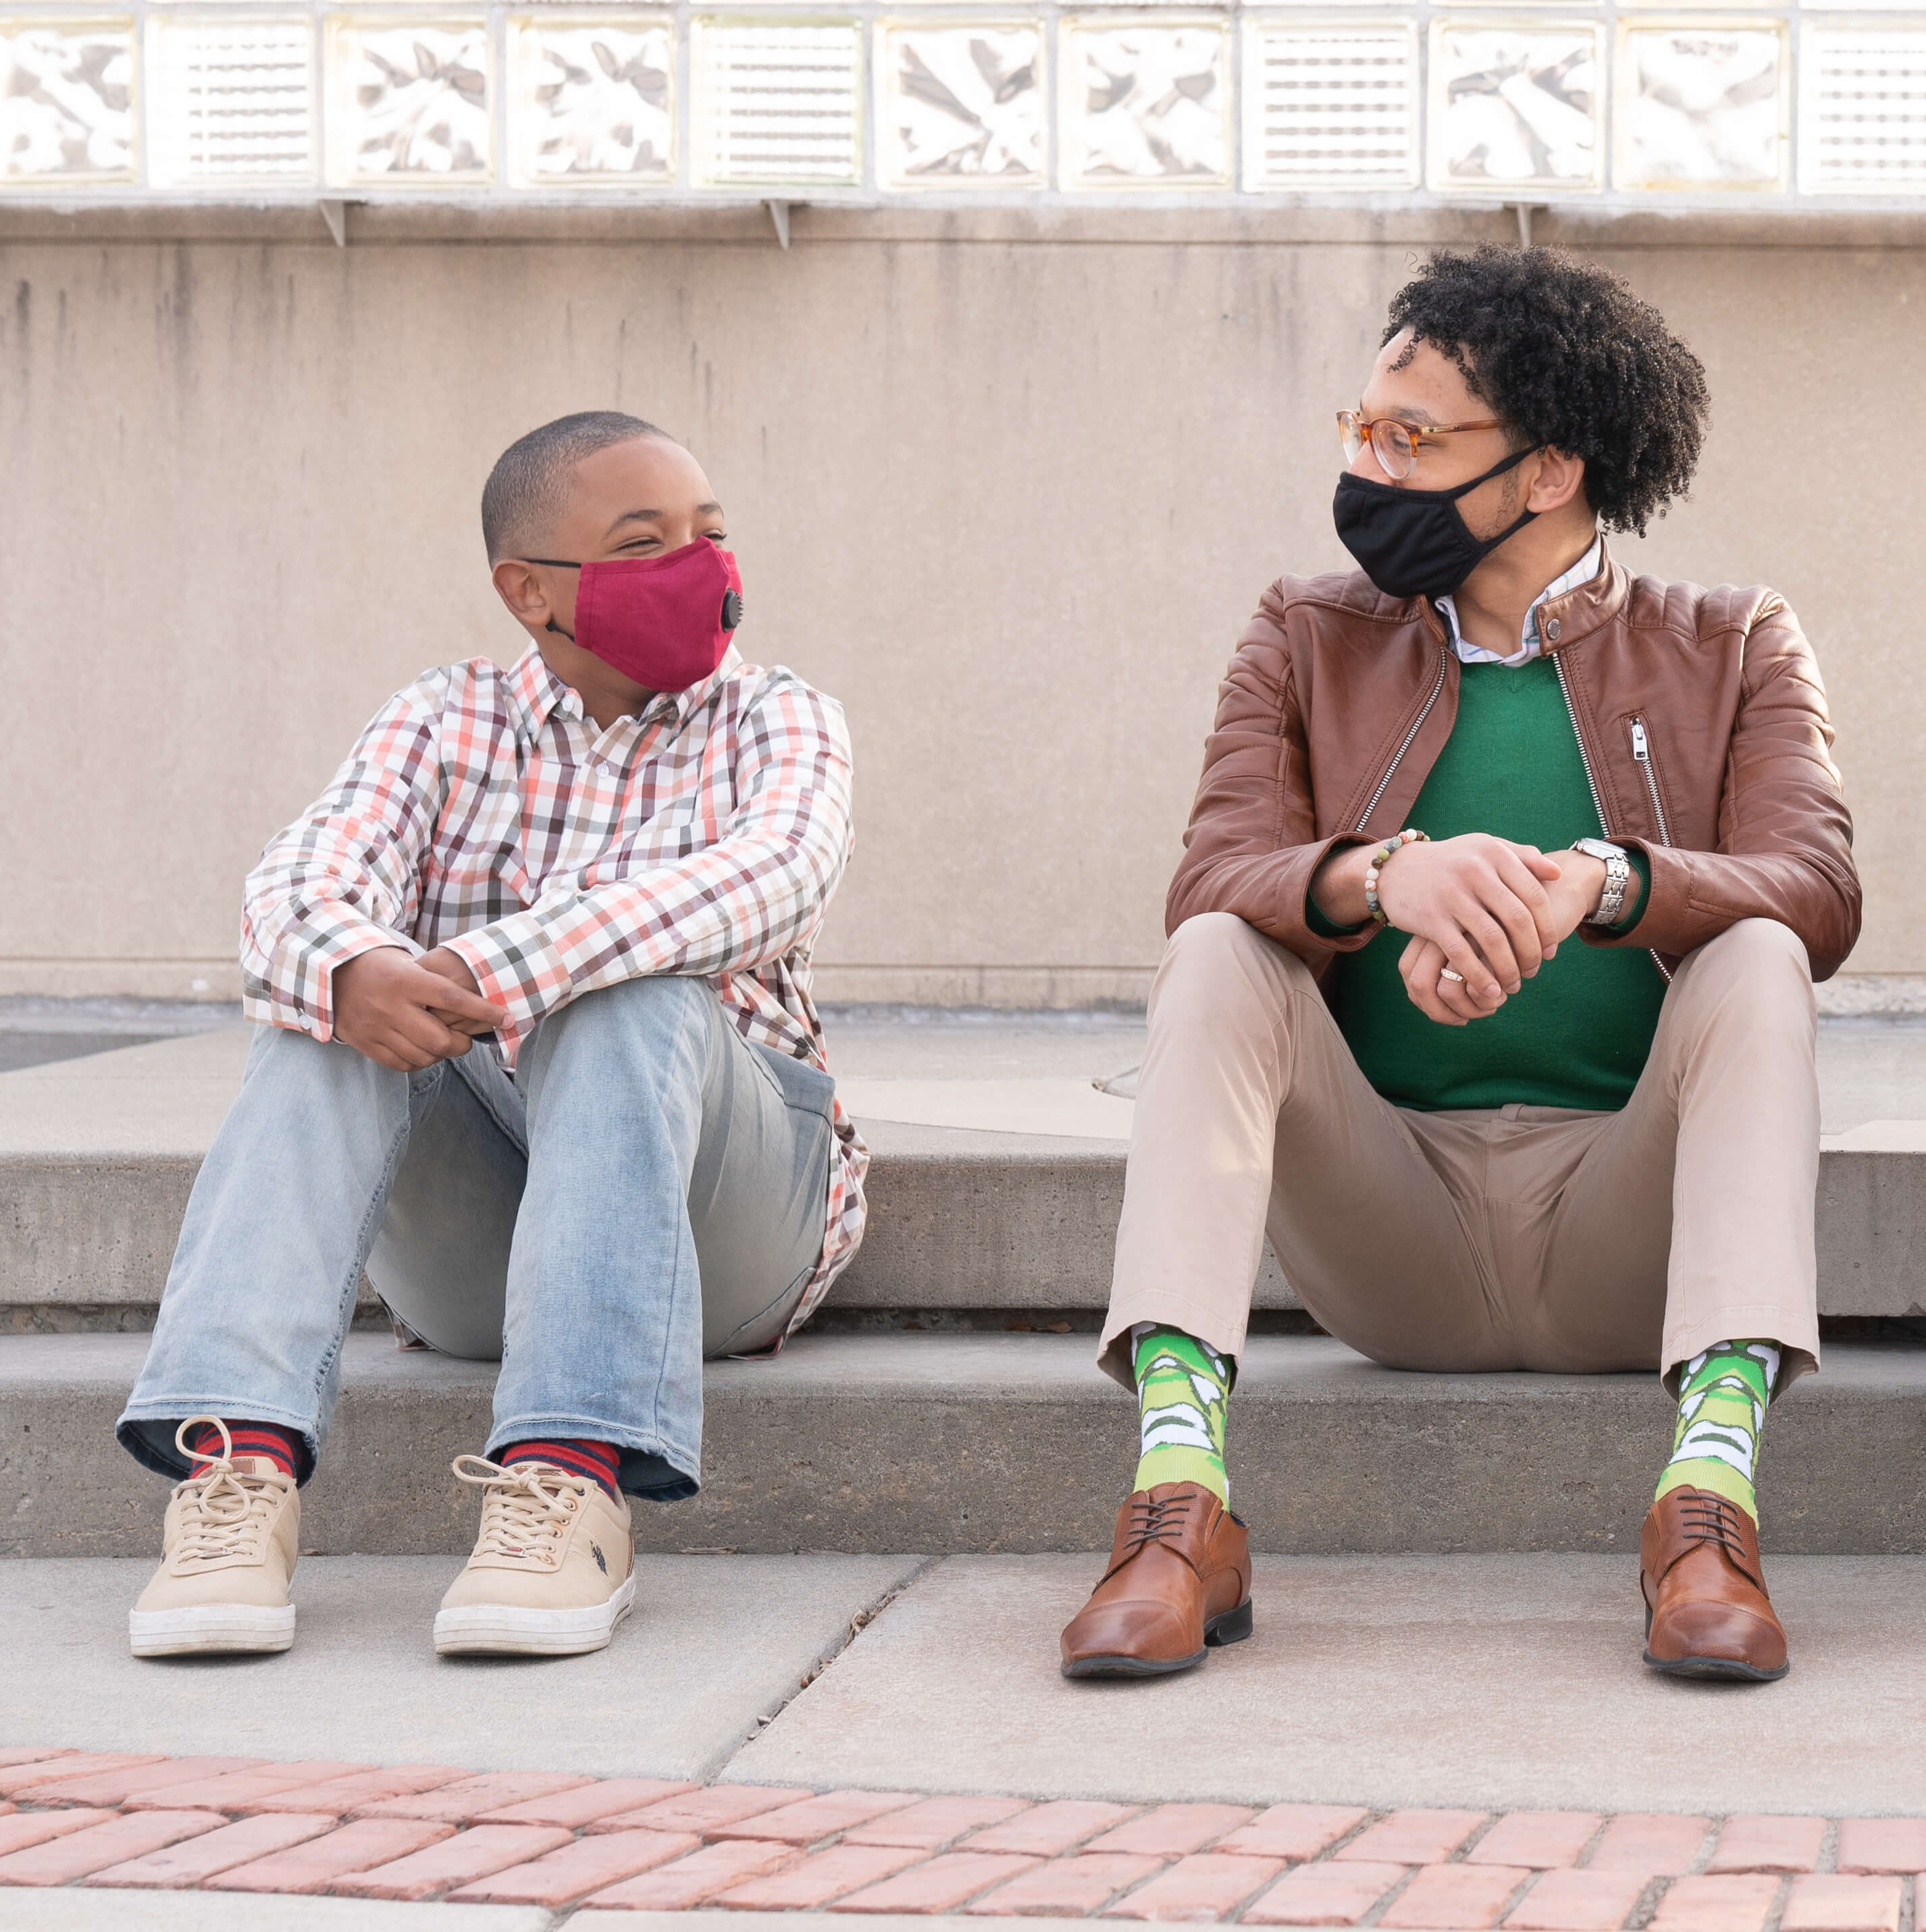 A mentor sitting with a child on a curb and both are masked